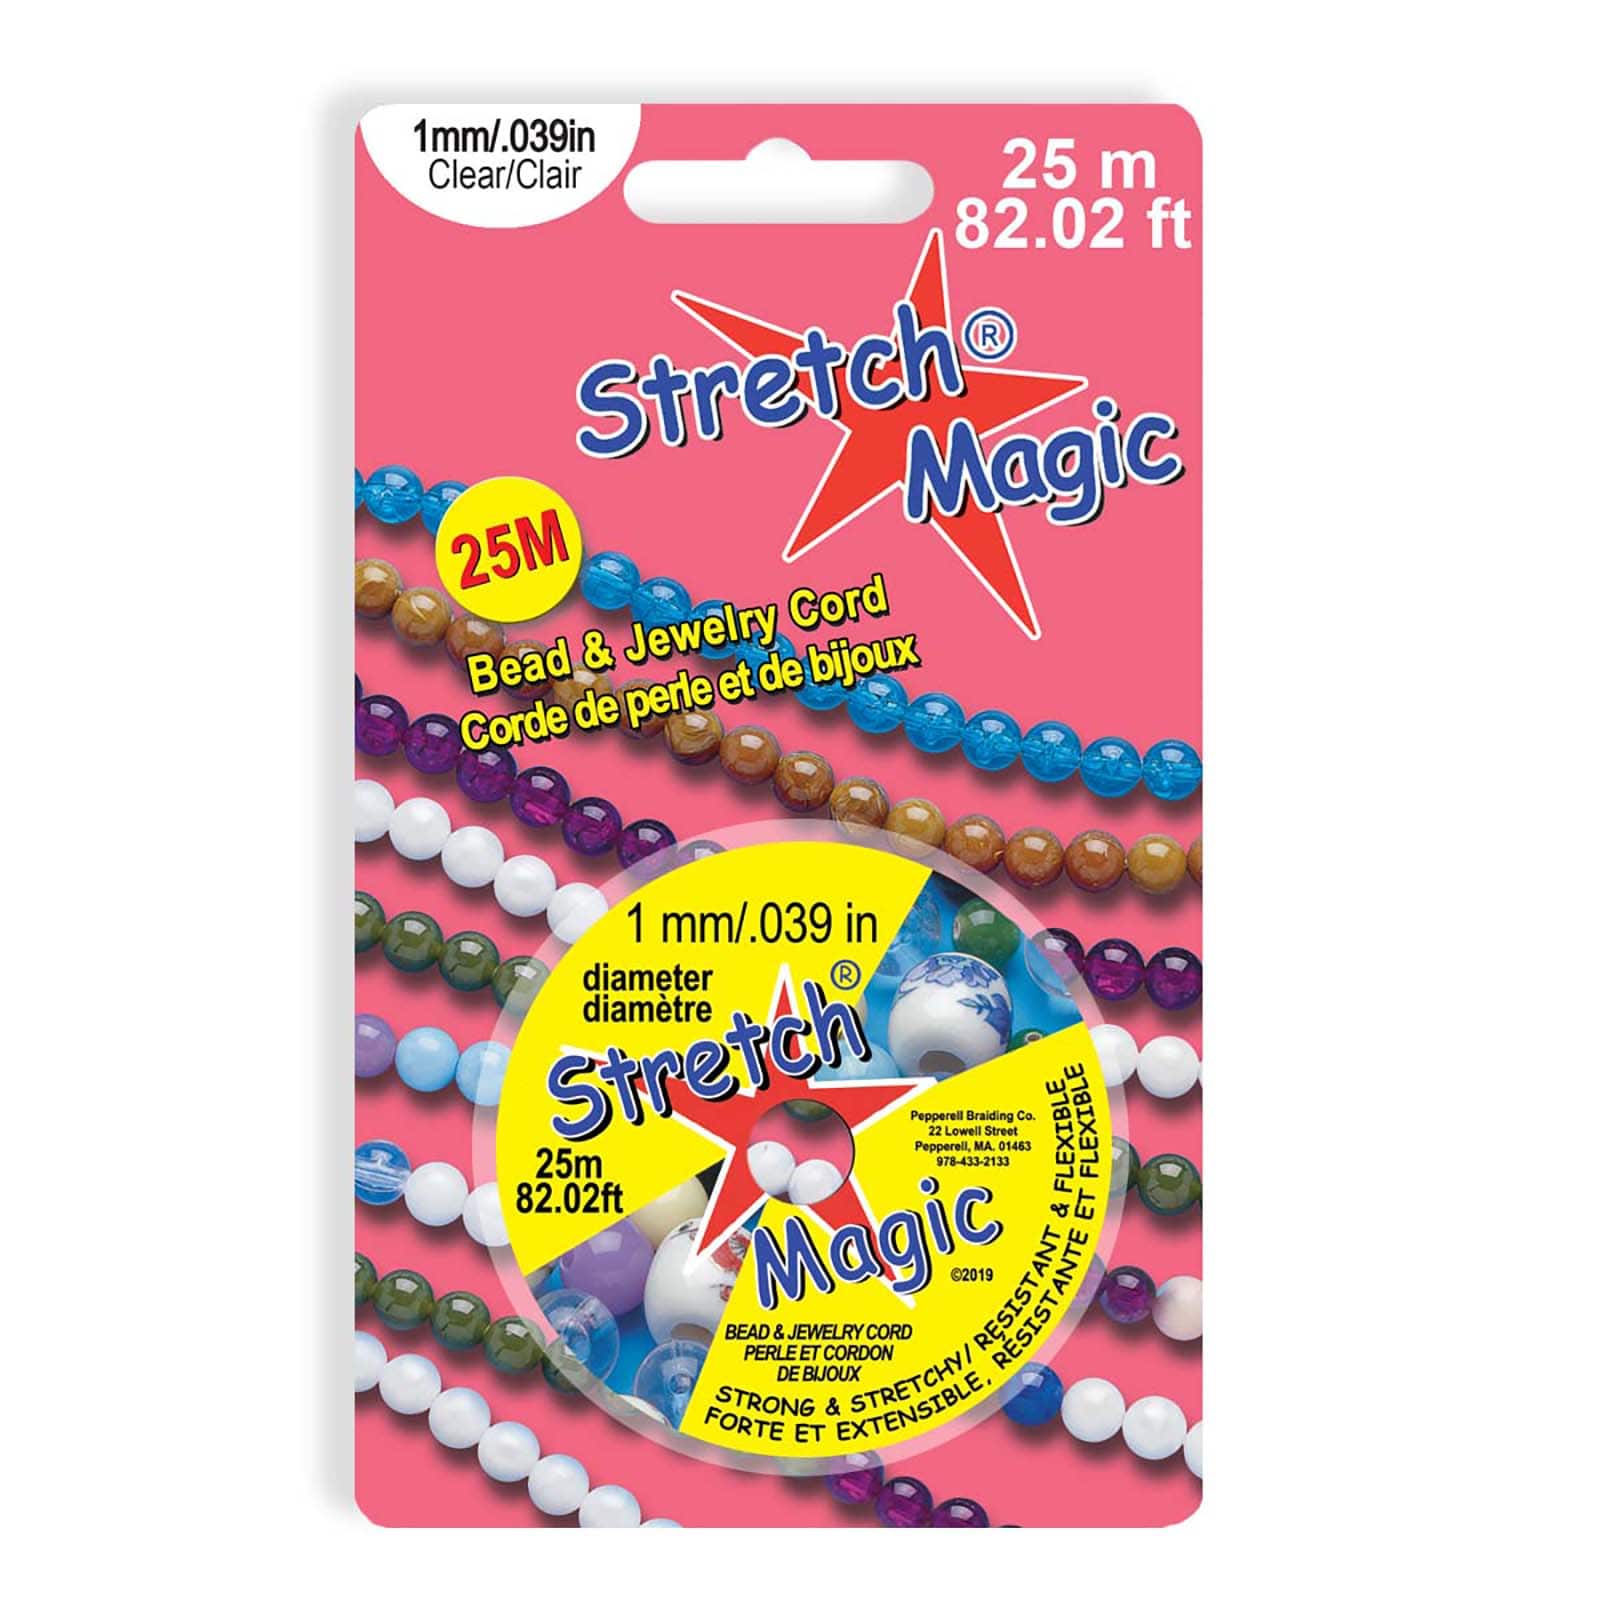 Stretch® Magic Clear Cord, .5MM – Praha® Beads and Jewelry